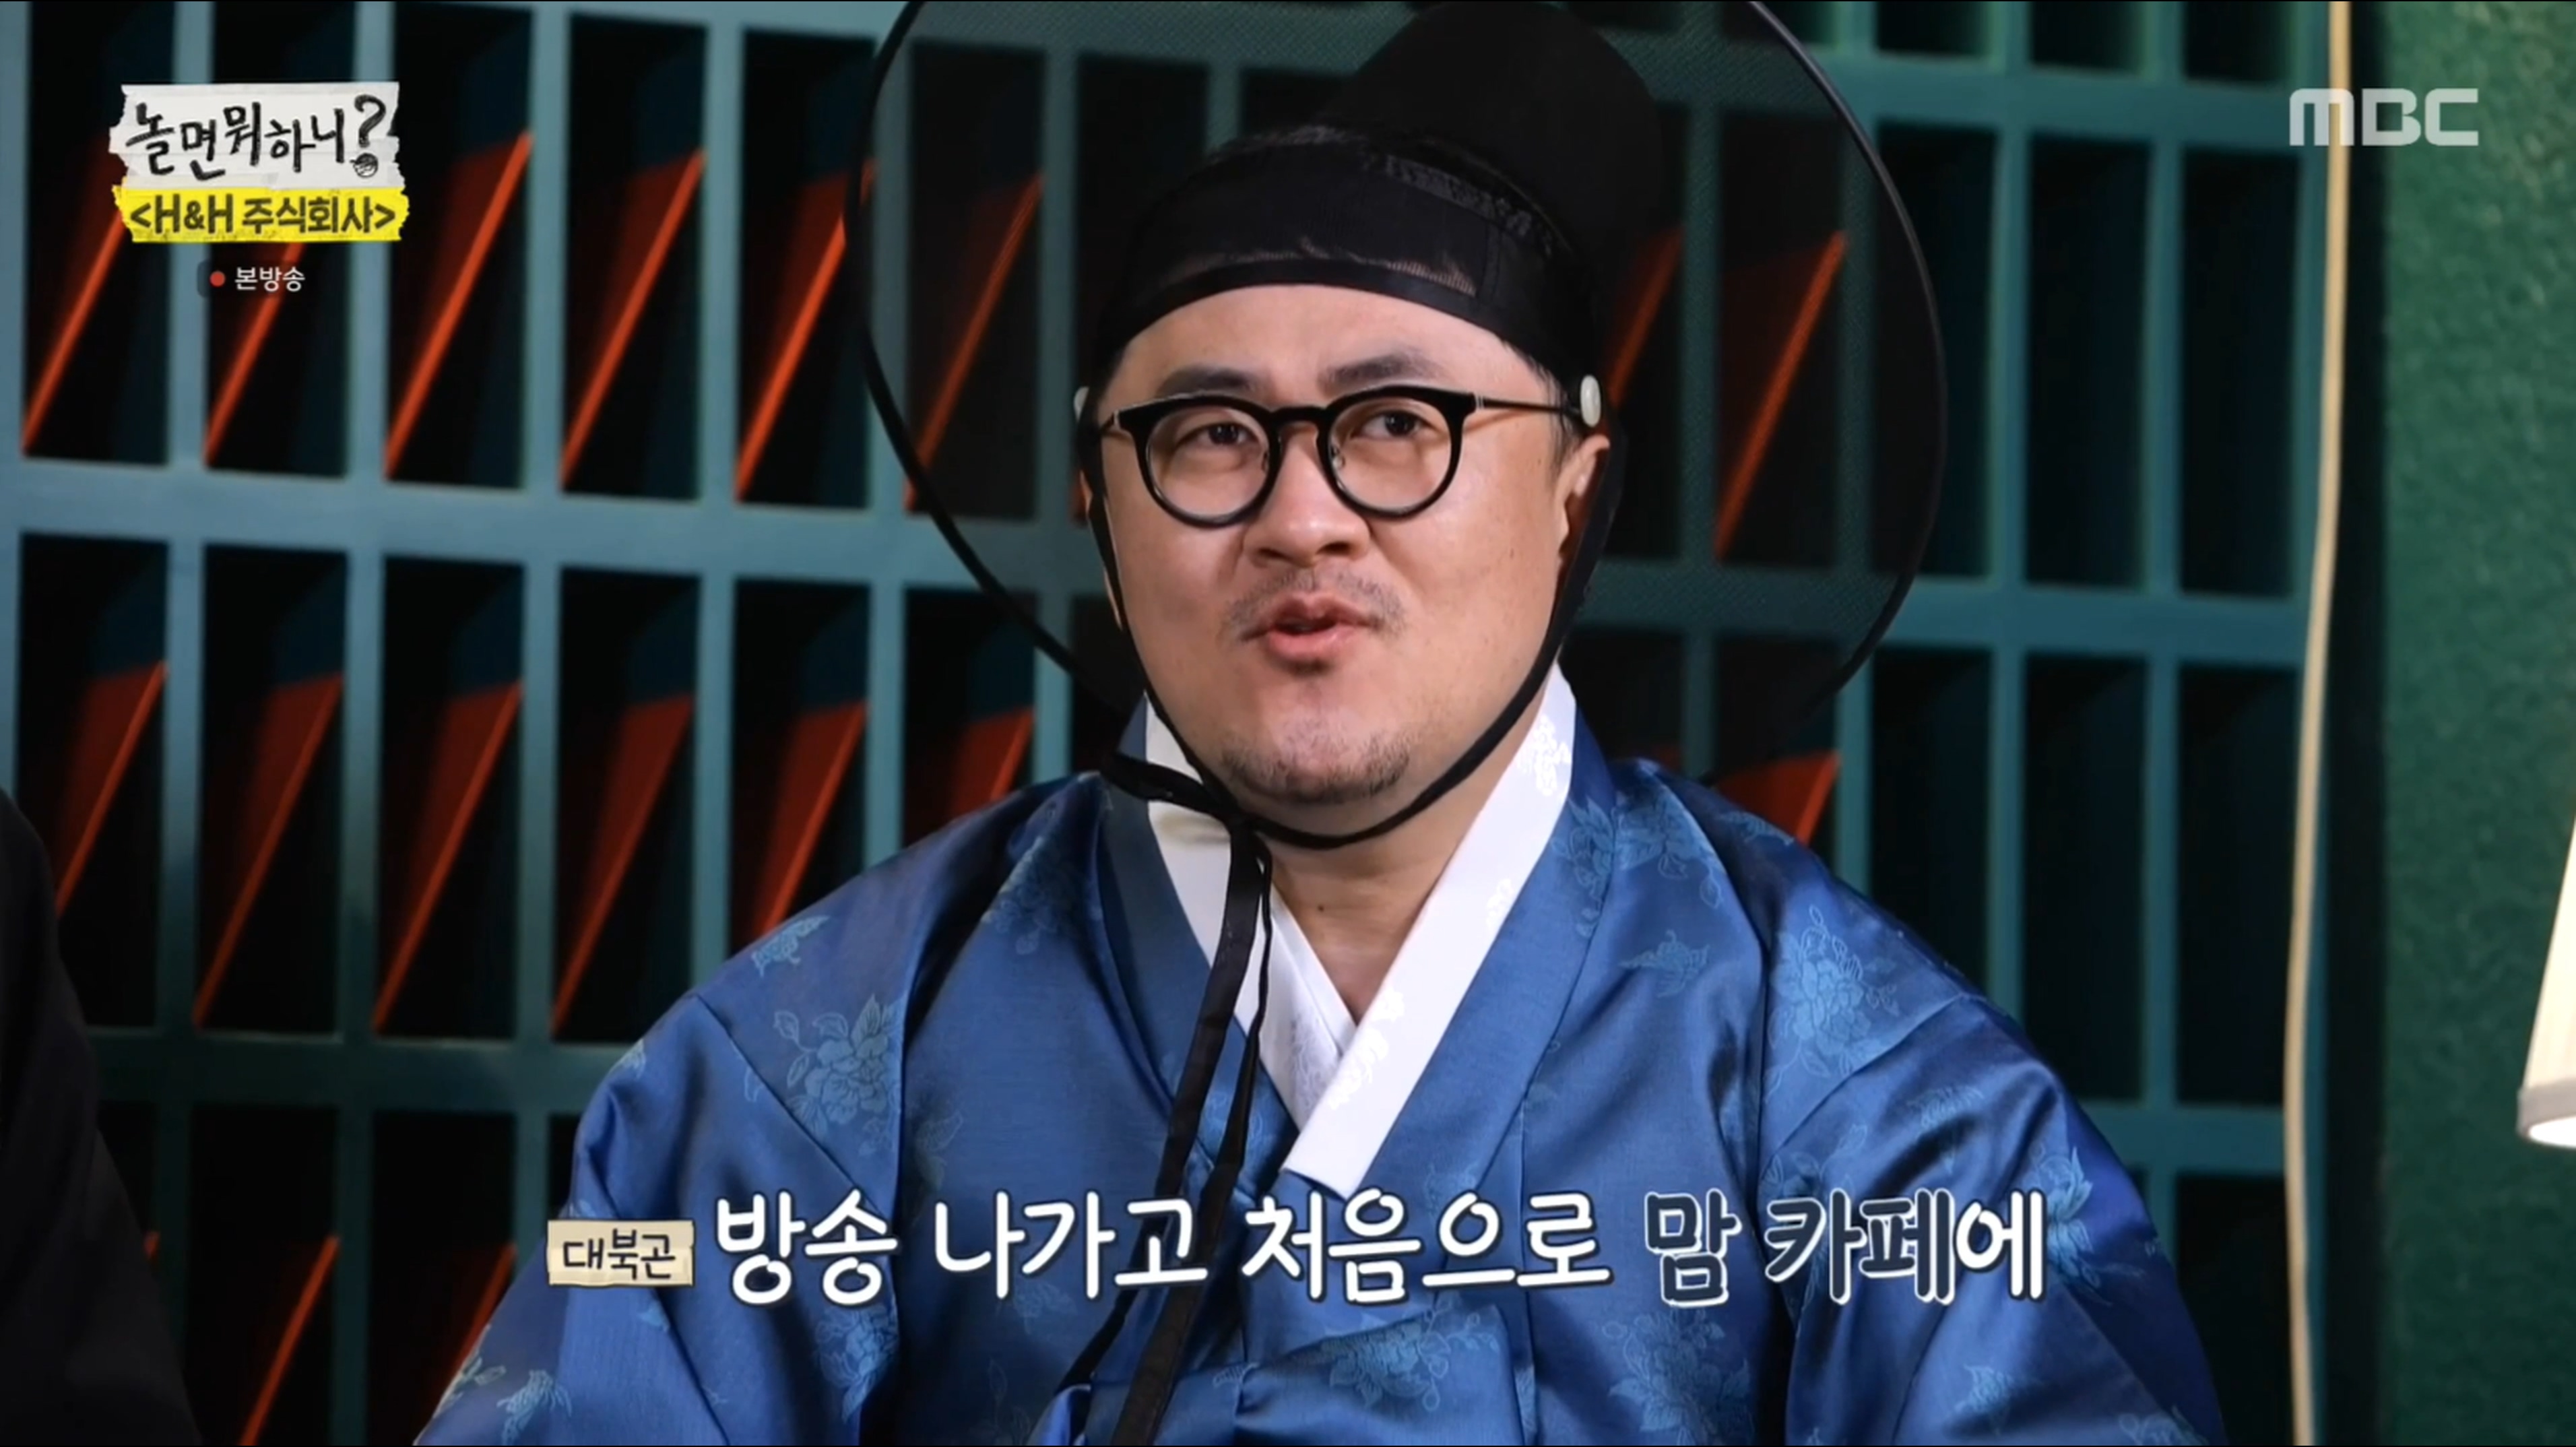 Evidence that Defconn was hot at what he did when he played.